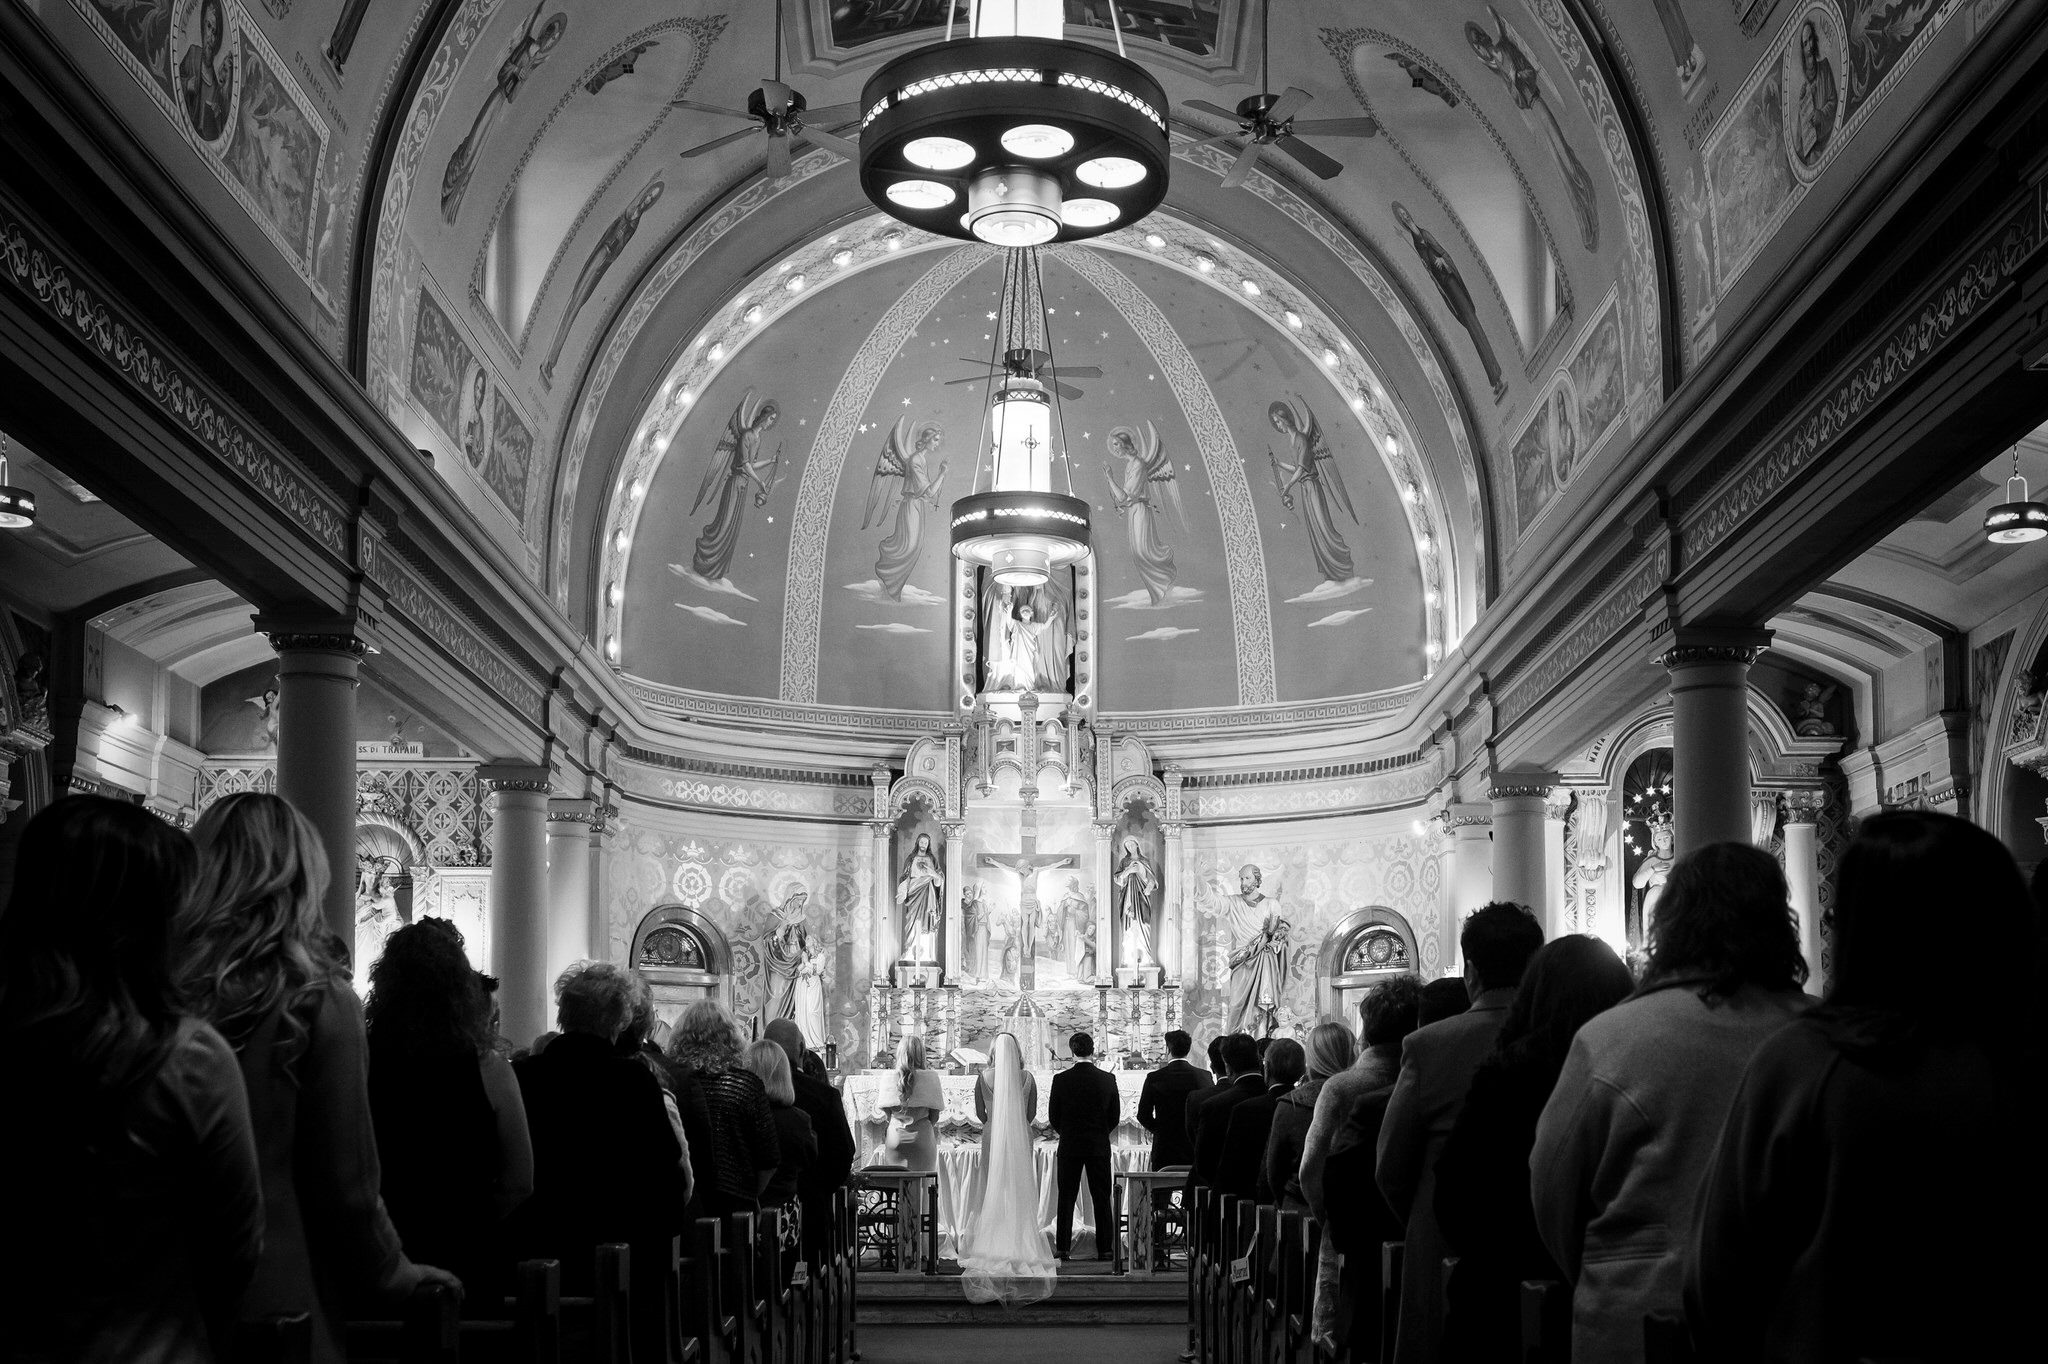 The bride and groom stand at the front of the church aisle on their wedding day.